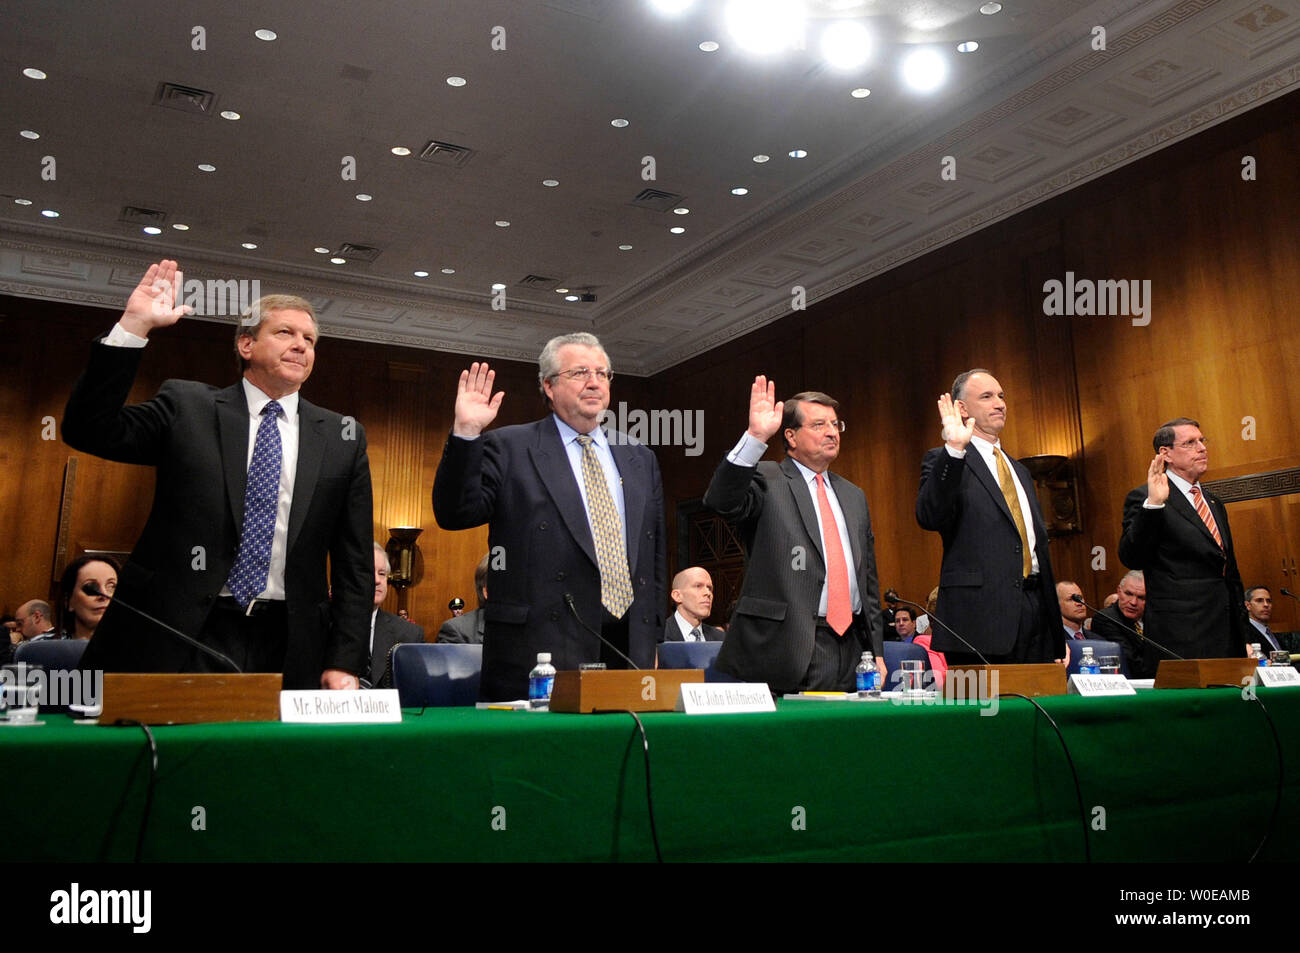 From left to right, Robert Malone, chairman and president of BP America Inc., John Hofmeister, president of Shell Oil Company, Peter Robertson, vice chairman of the Chevron Corporation, John Lowe, executive vice president of ConocoPhillips, and Stephen Simon, senior vice president of the Exxon Mobil Corporation,  are sworn in prior to a Judiciary Committee hearing on the rising price of oil in Washington on May 21, 2008. (UPI Photo/Kevin Dietsch) Stock Photo